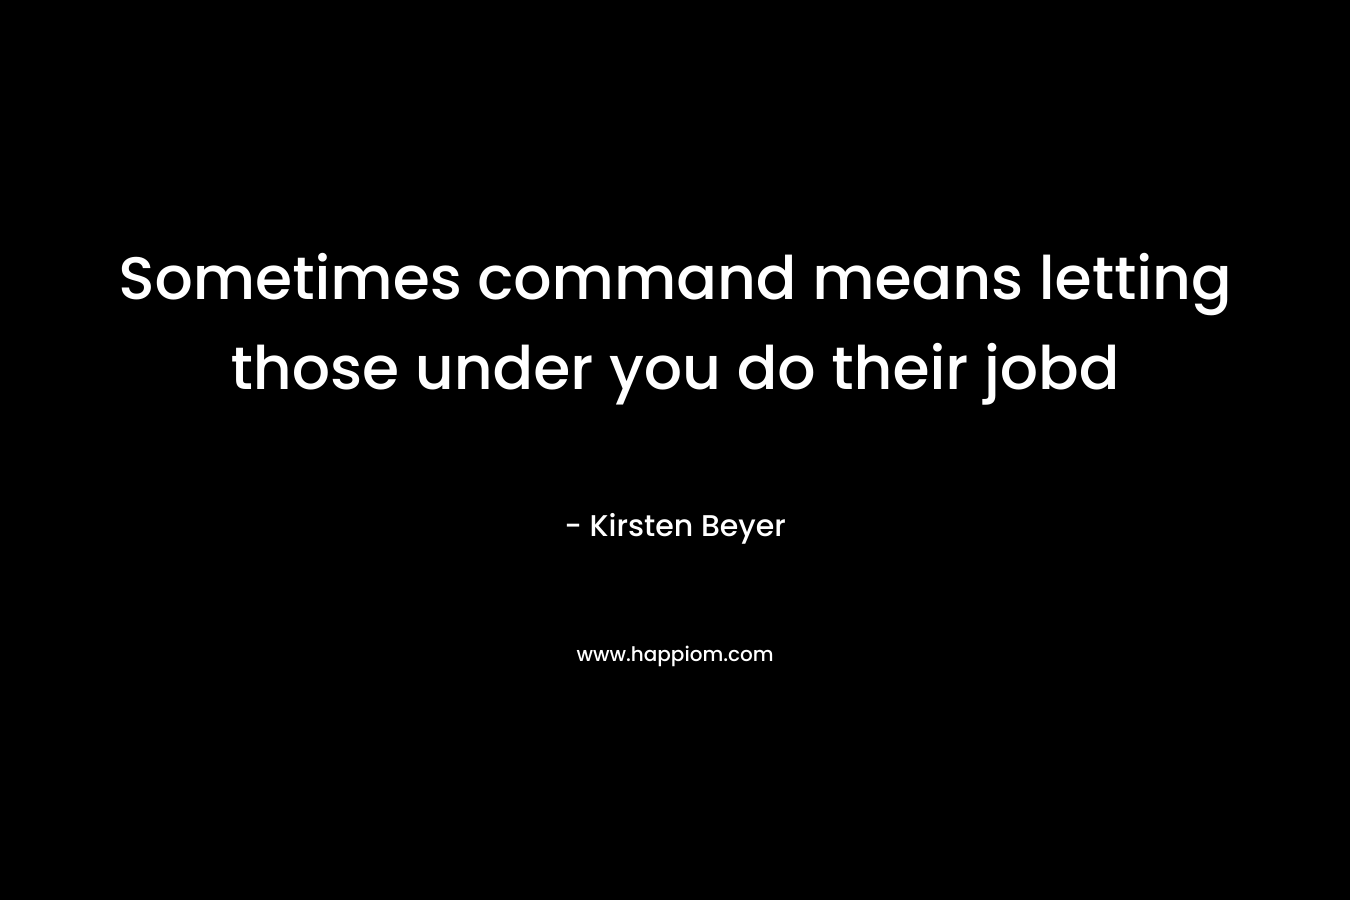 Sometimes command means letting those under you do their jobd